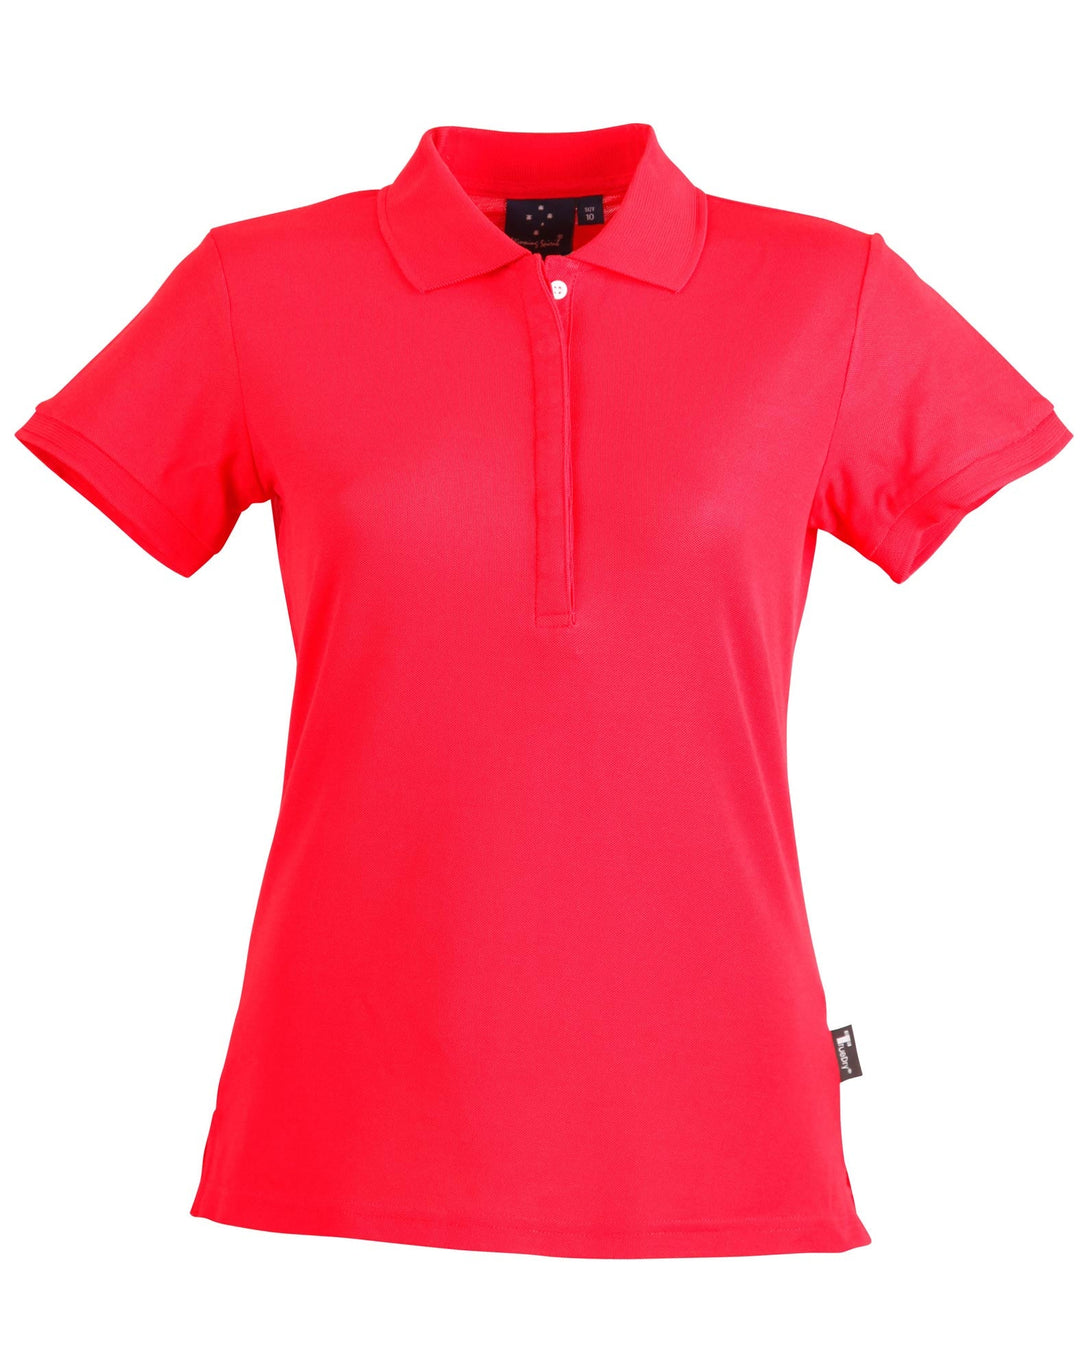 PS64 CONNECTION POLO Ladies